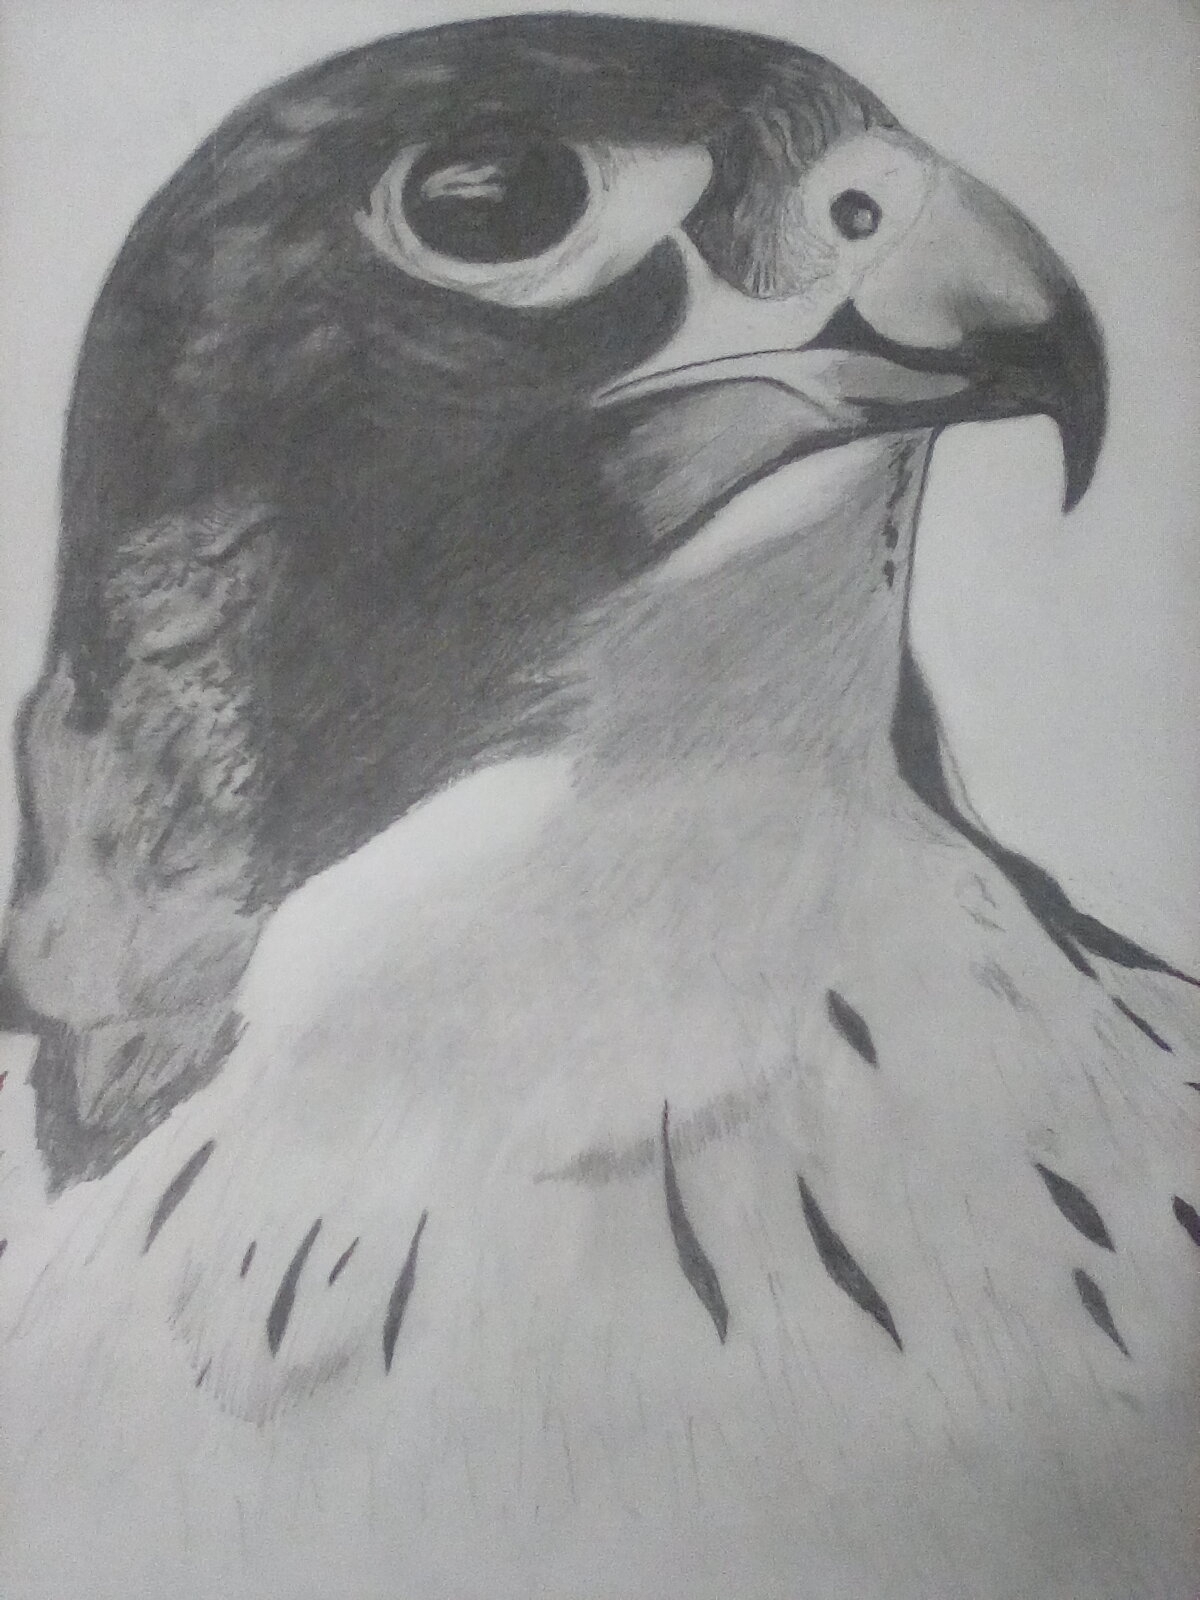 The finished drawing of the falcon. 